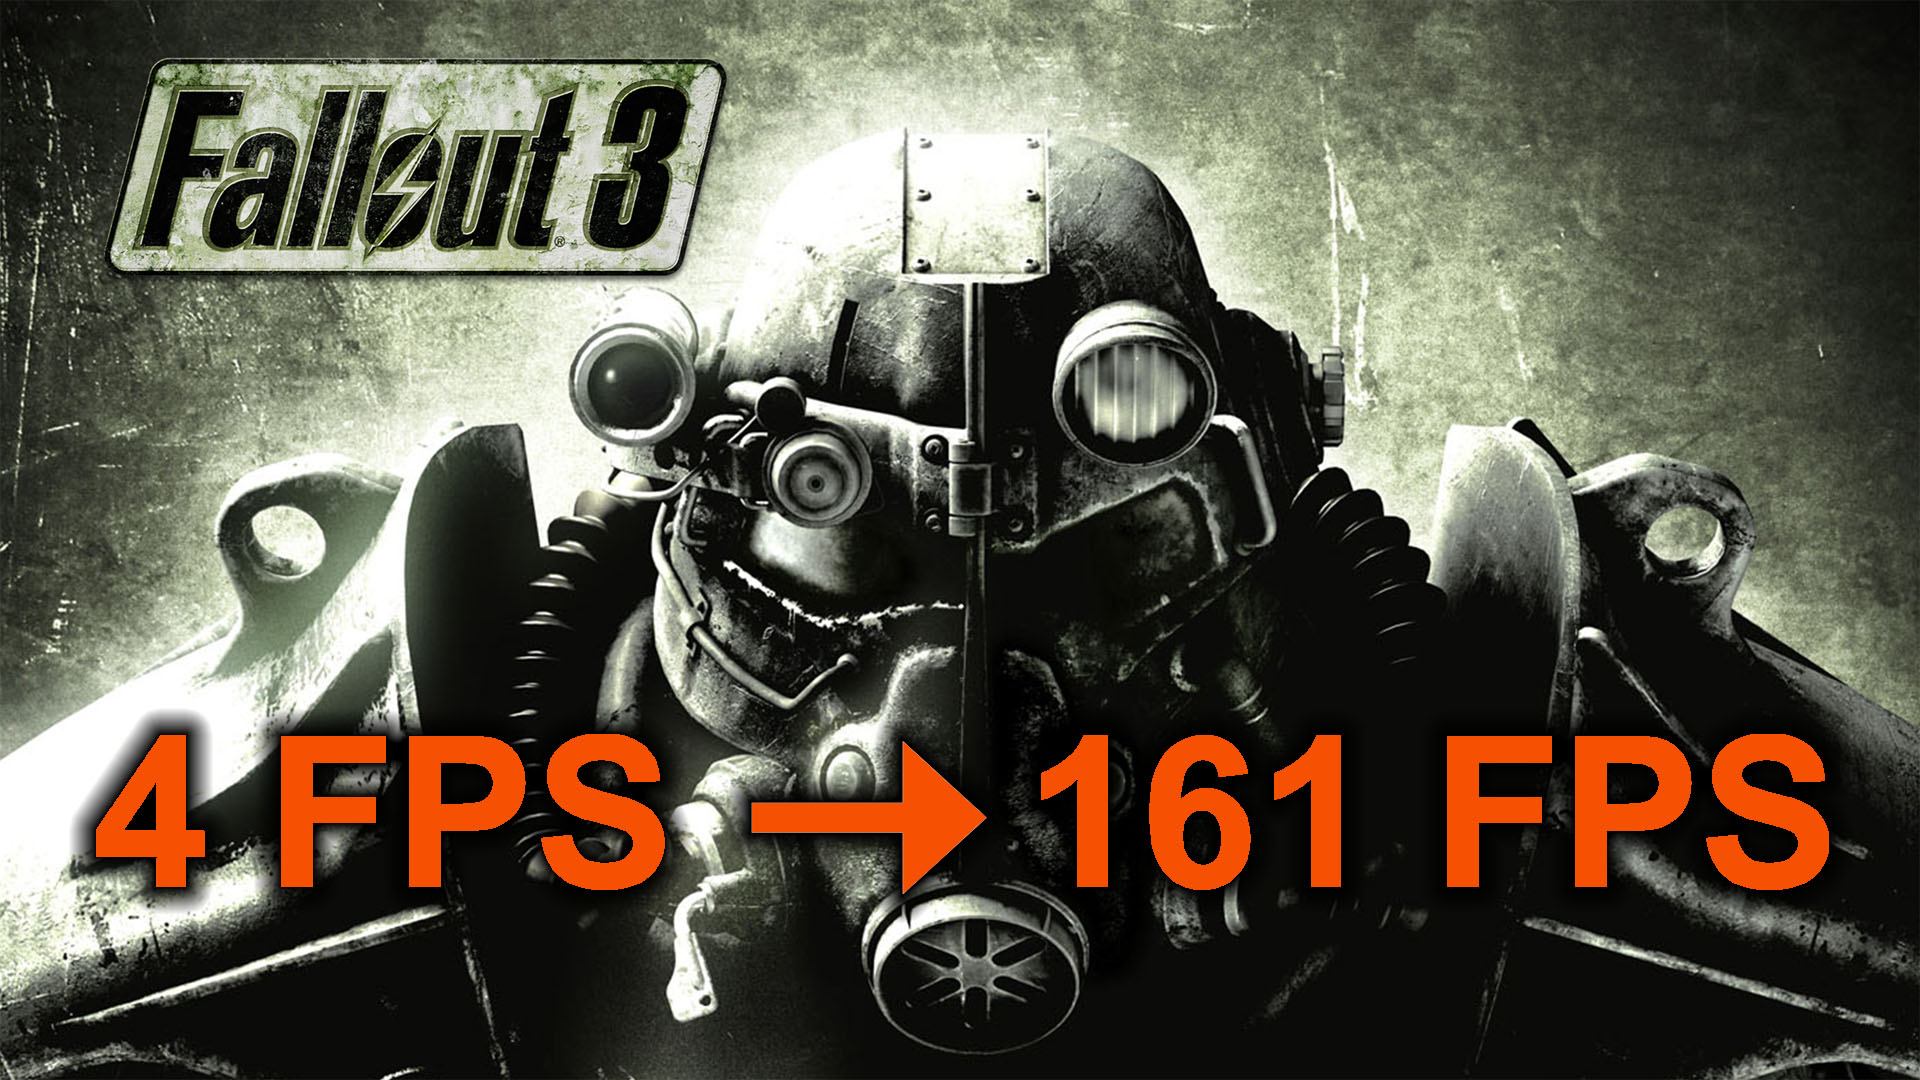 Fallout 3 is broken for some, but here are some ways to fix it